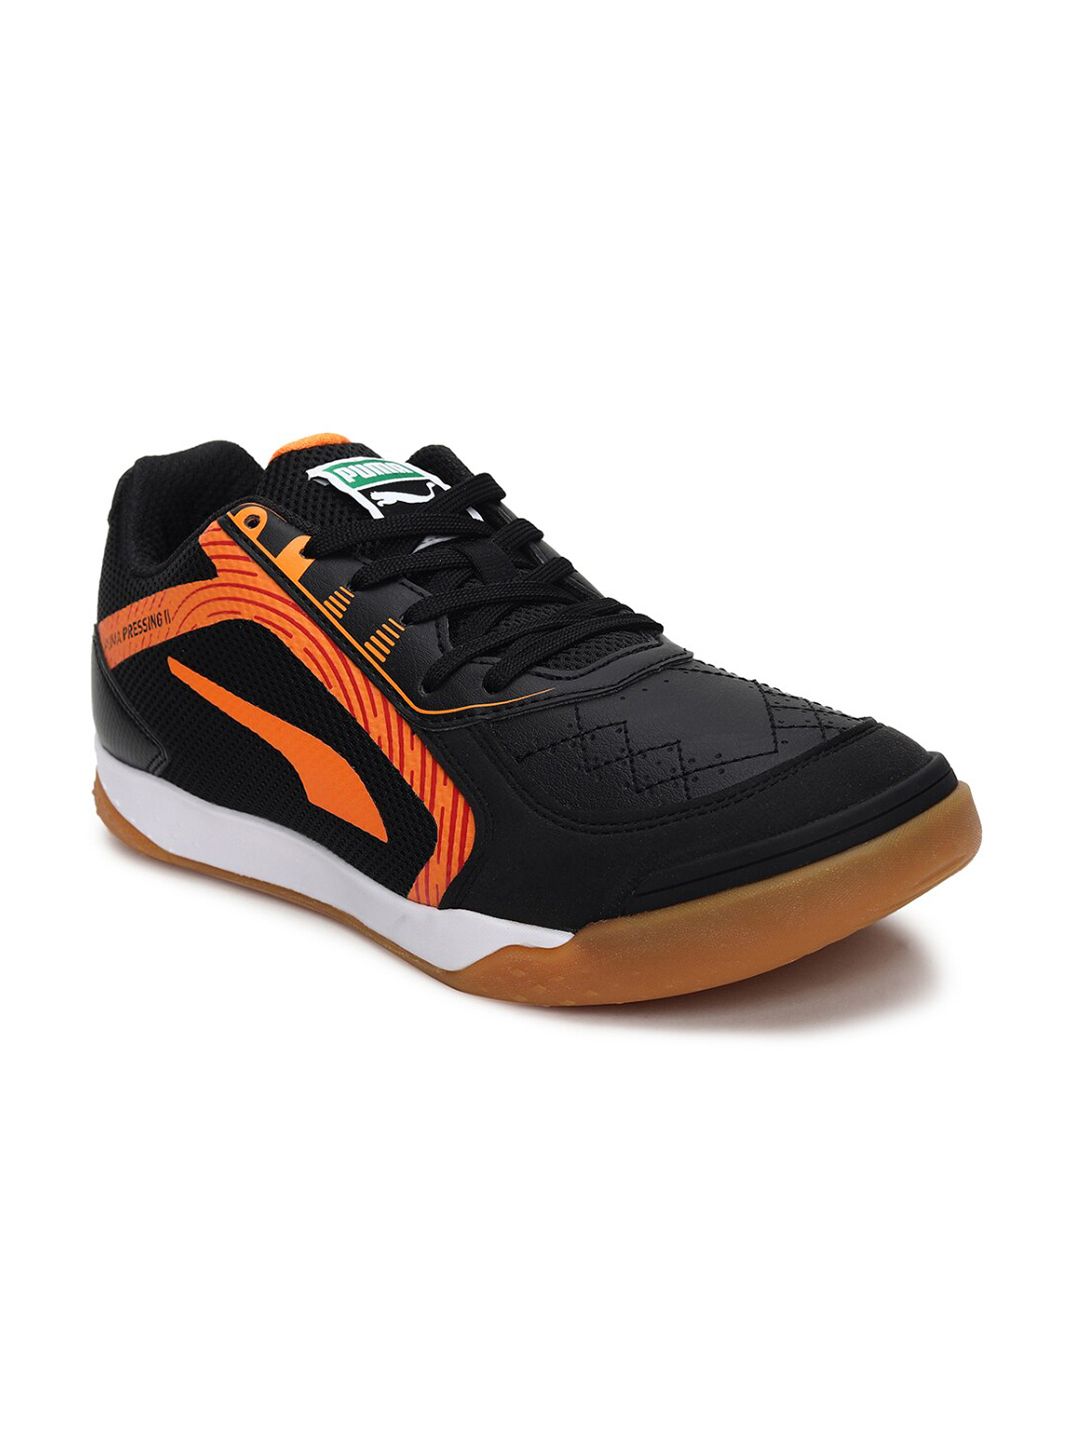 Puma Unisex Black Mesh Football Non-Marking Shoes Price in India